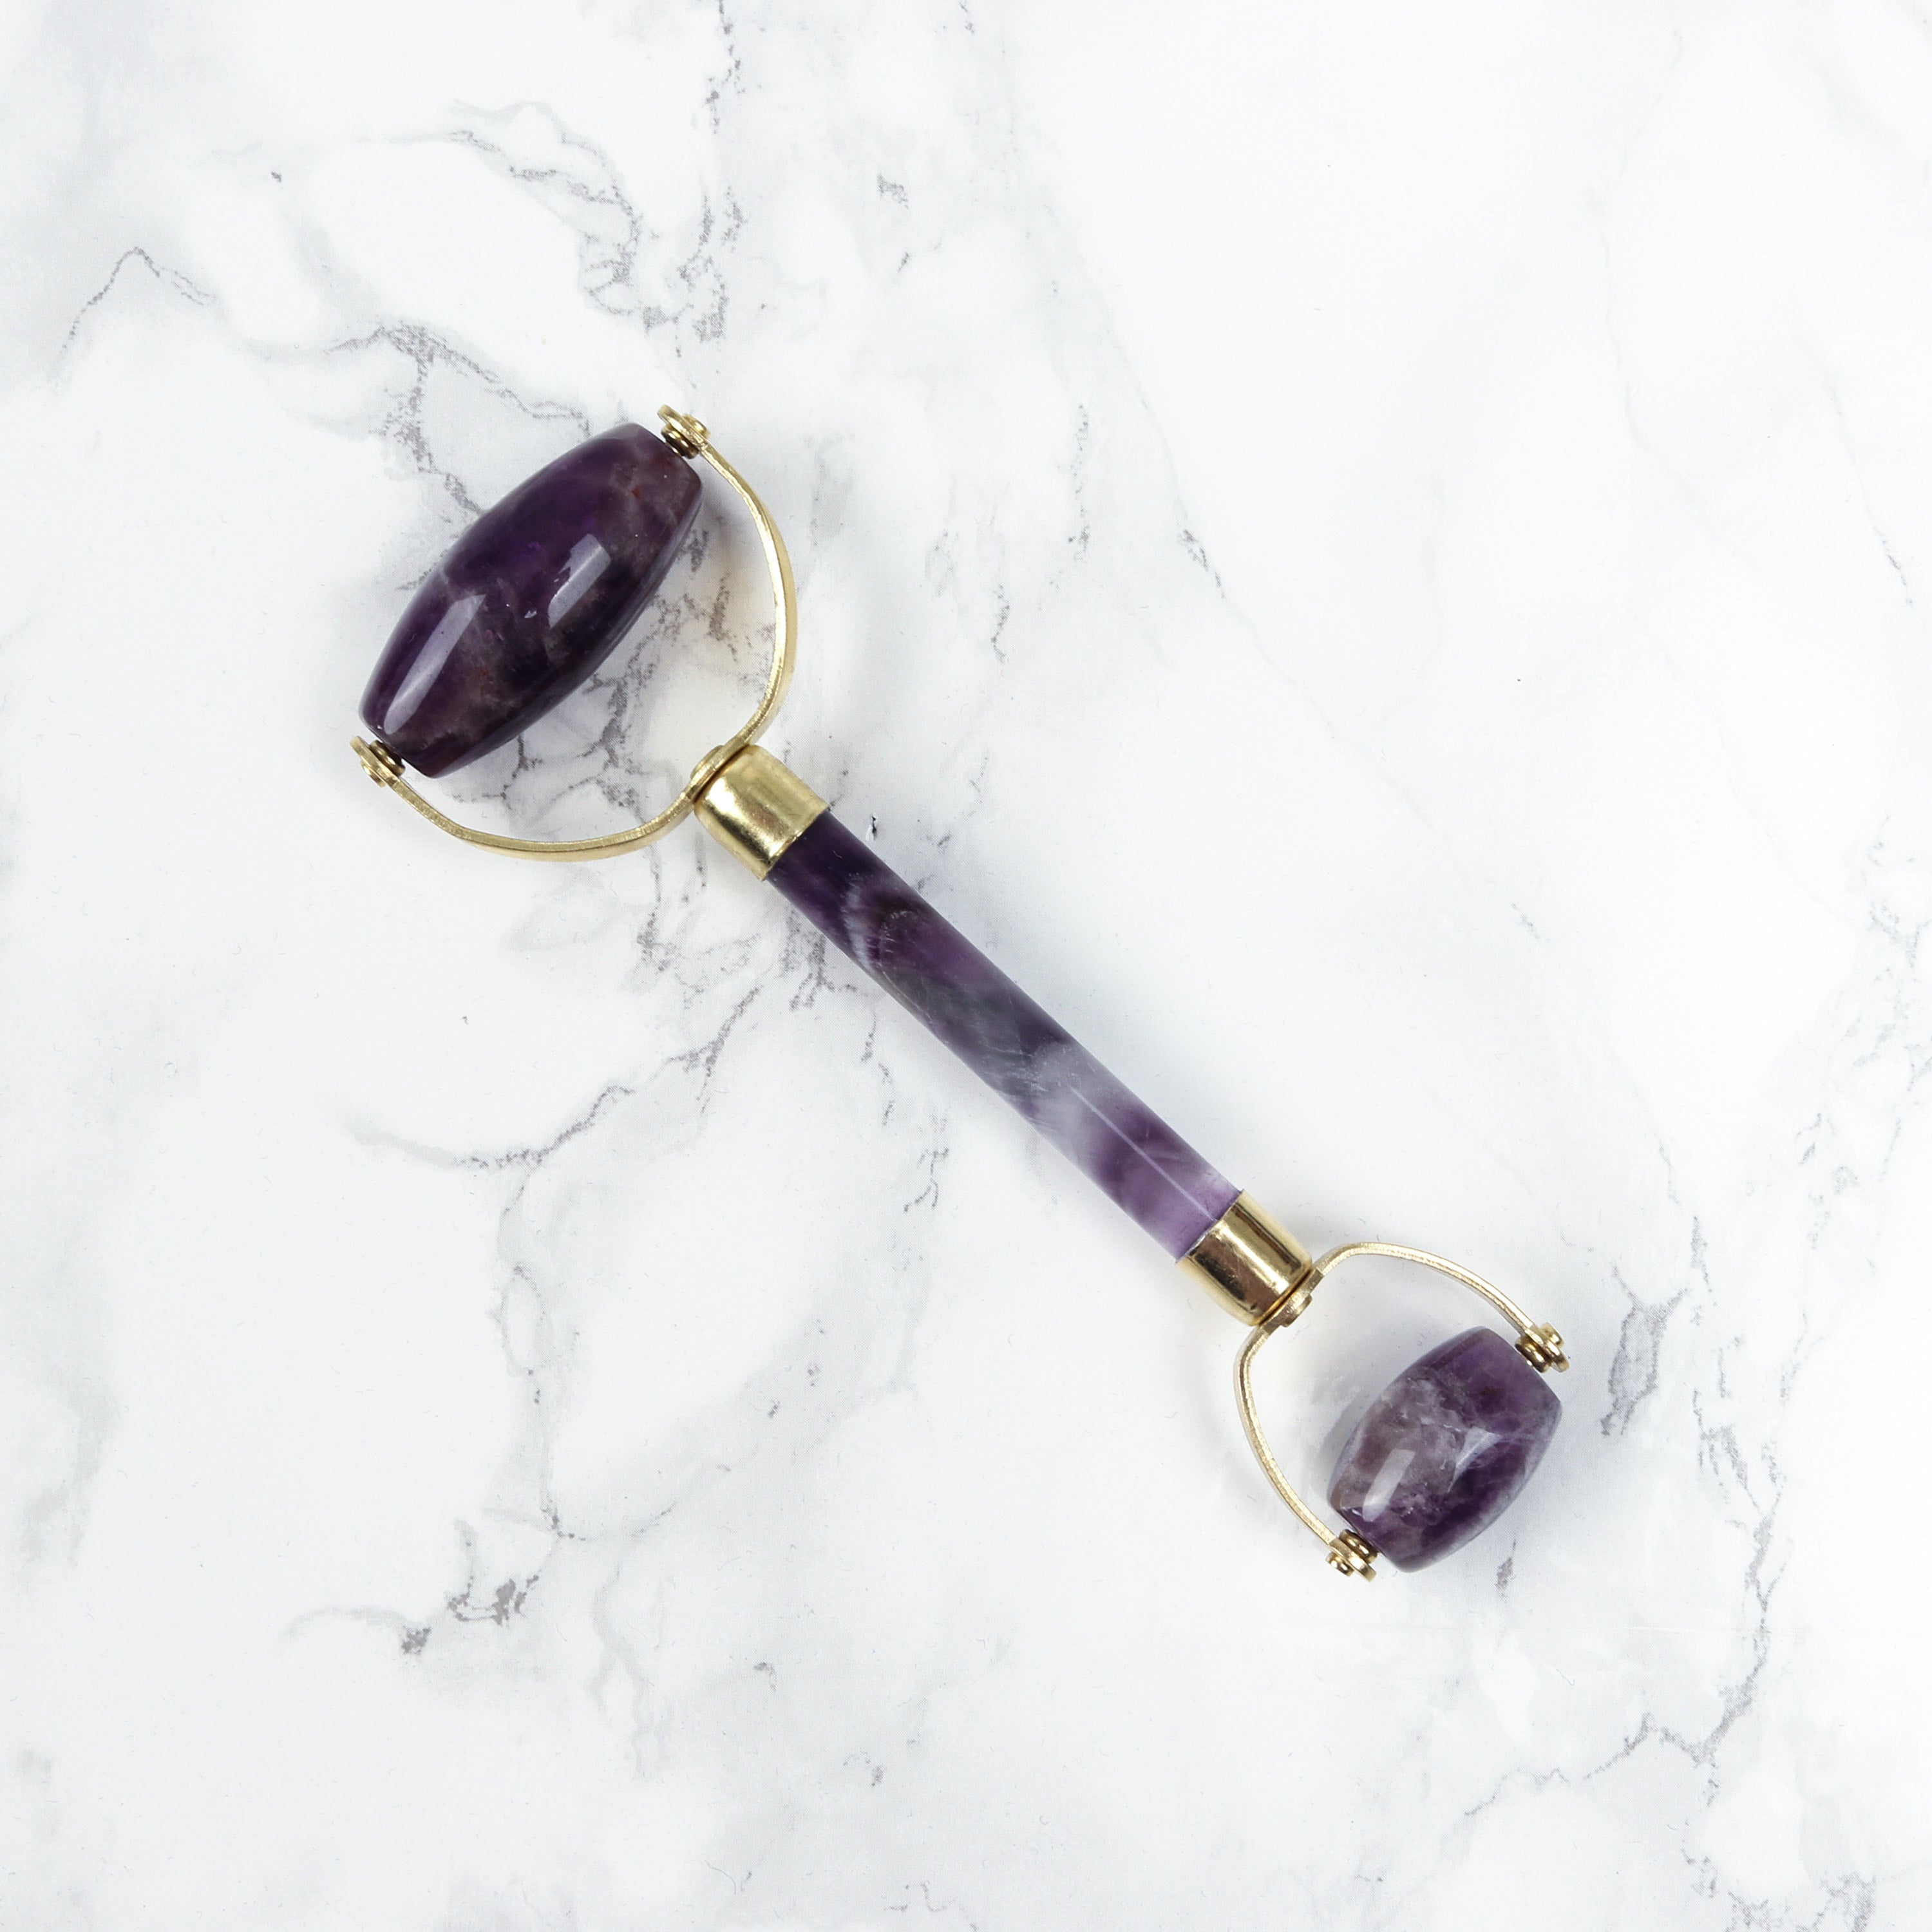 Double Headed Amethyst Roller - The Amethyst Face Roller